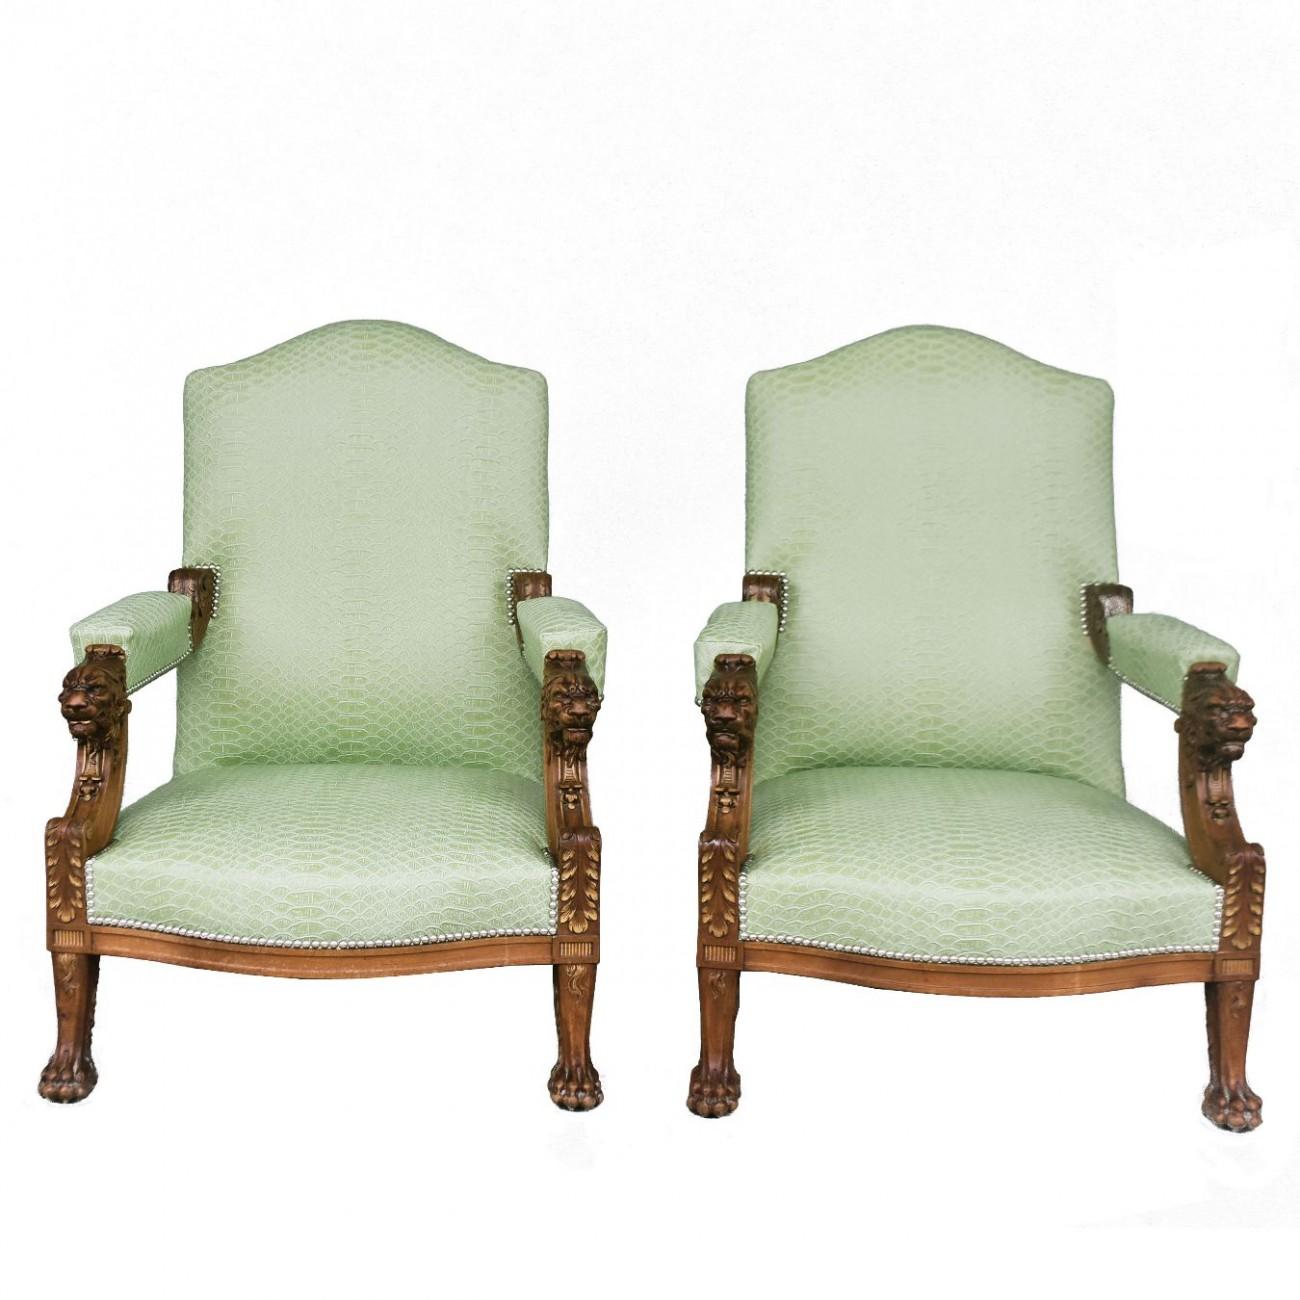 Late 19th Century Pair of Walnut Armchairs with Lion and Claw Feet